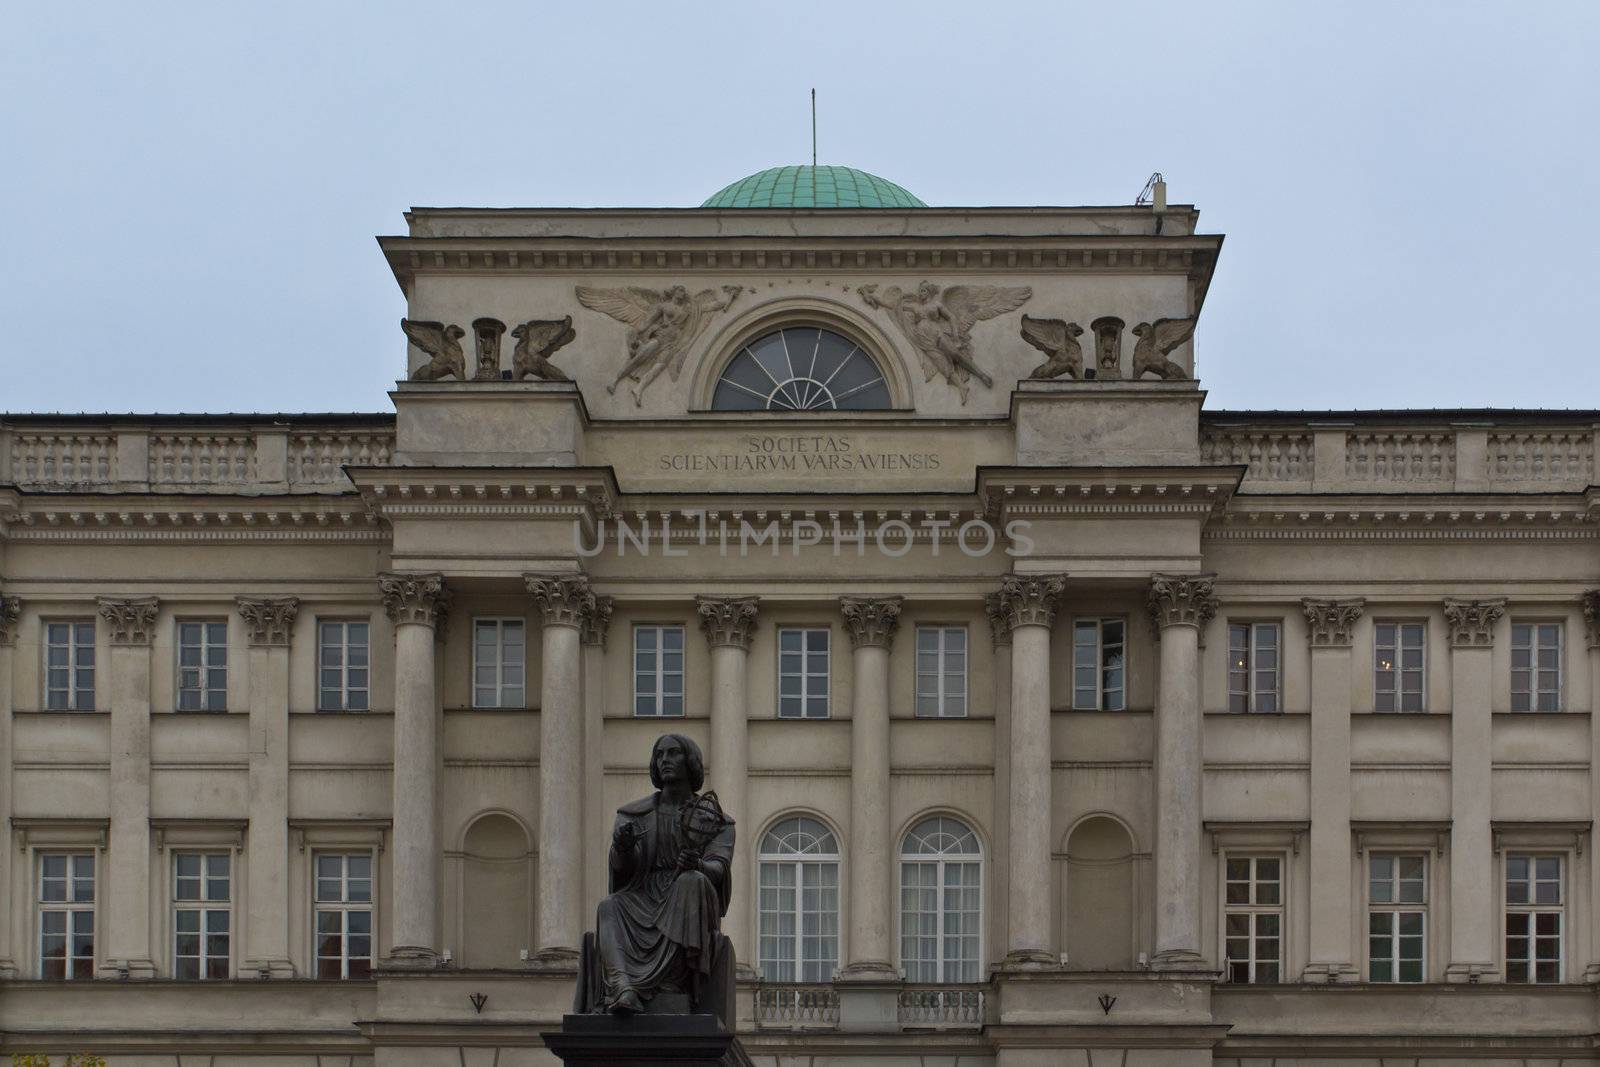 The Warsaw academy of science with a Nikolaus Kopernikus statue in front